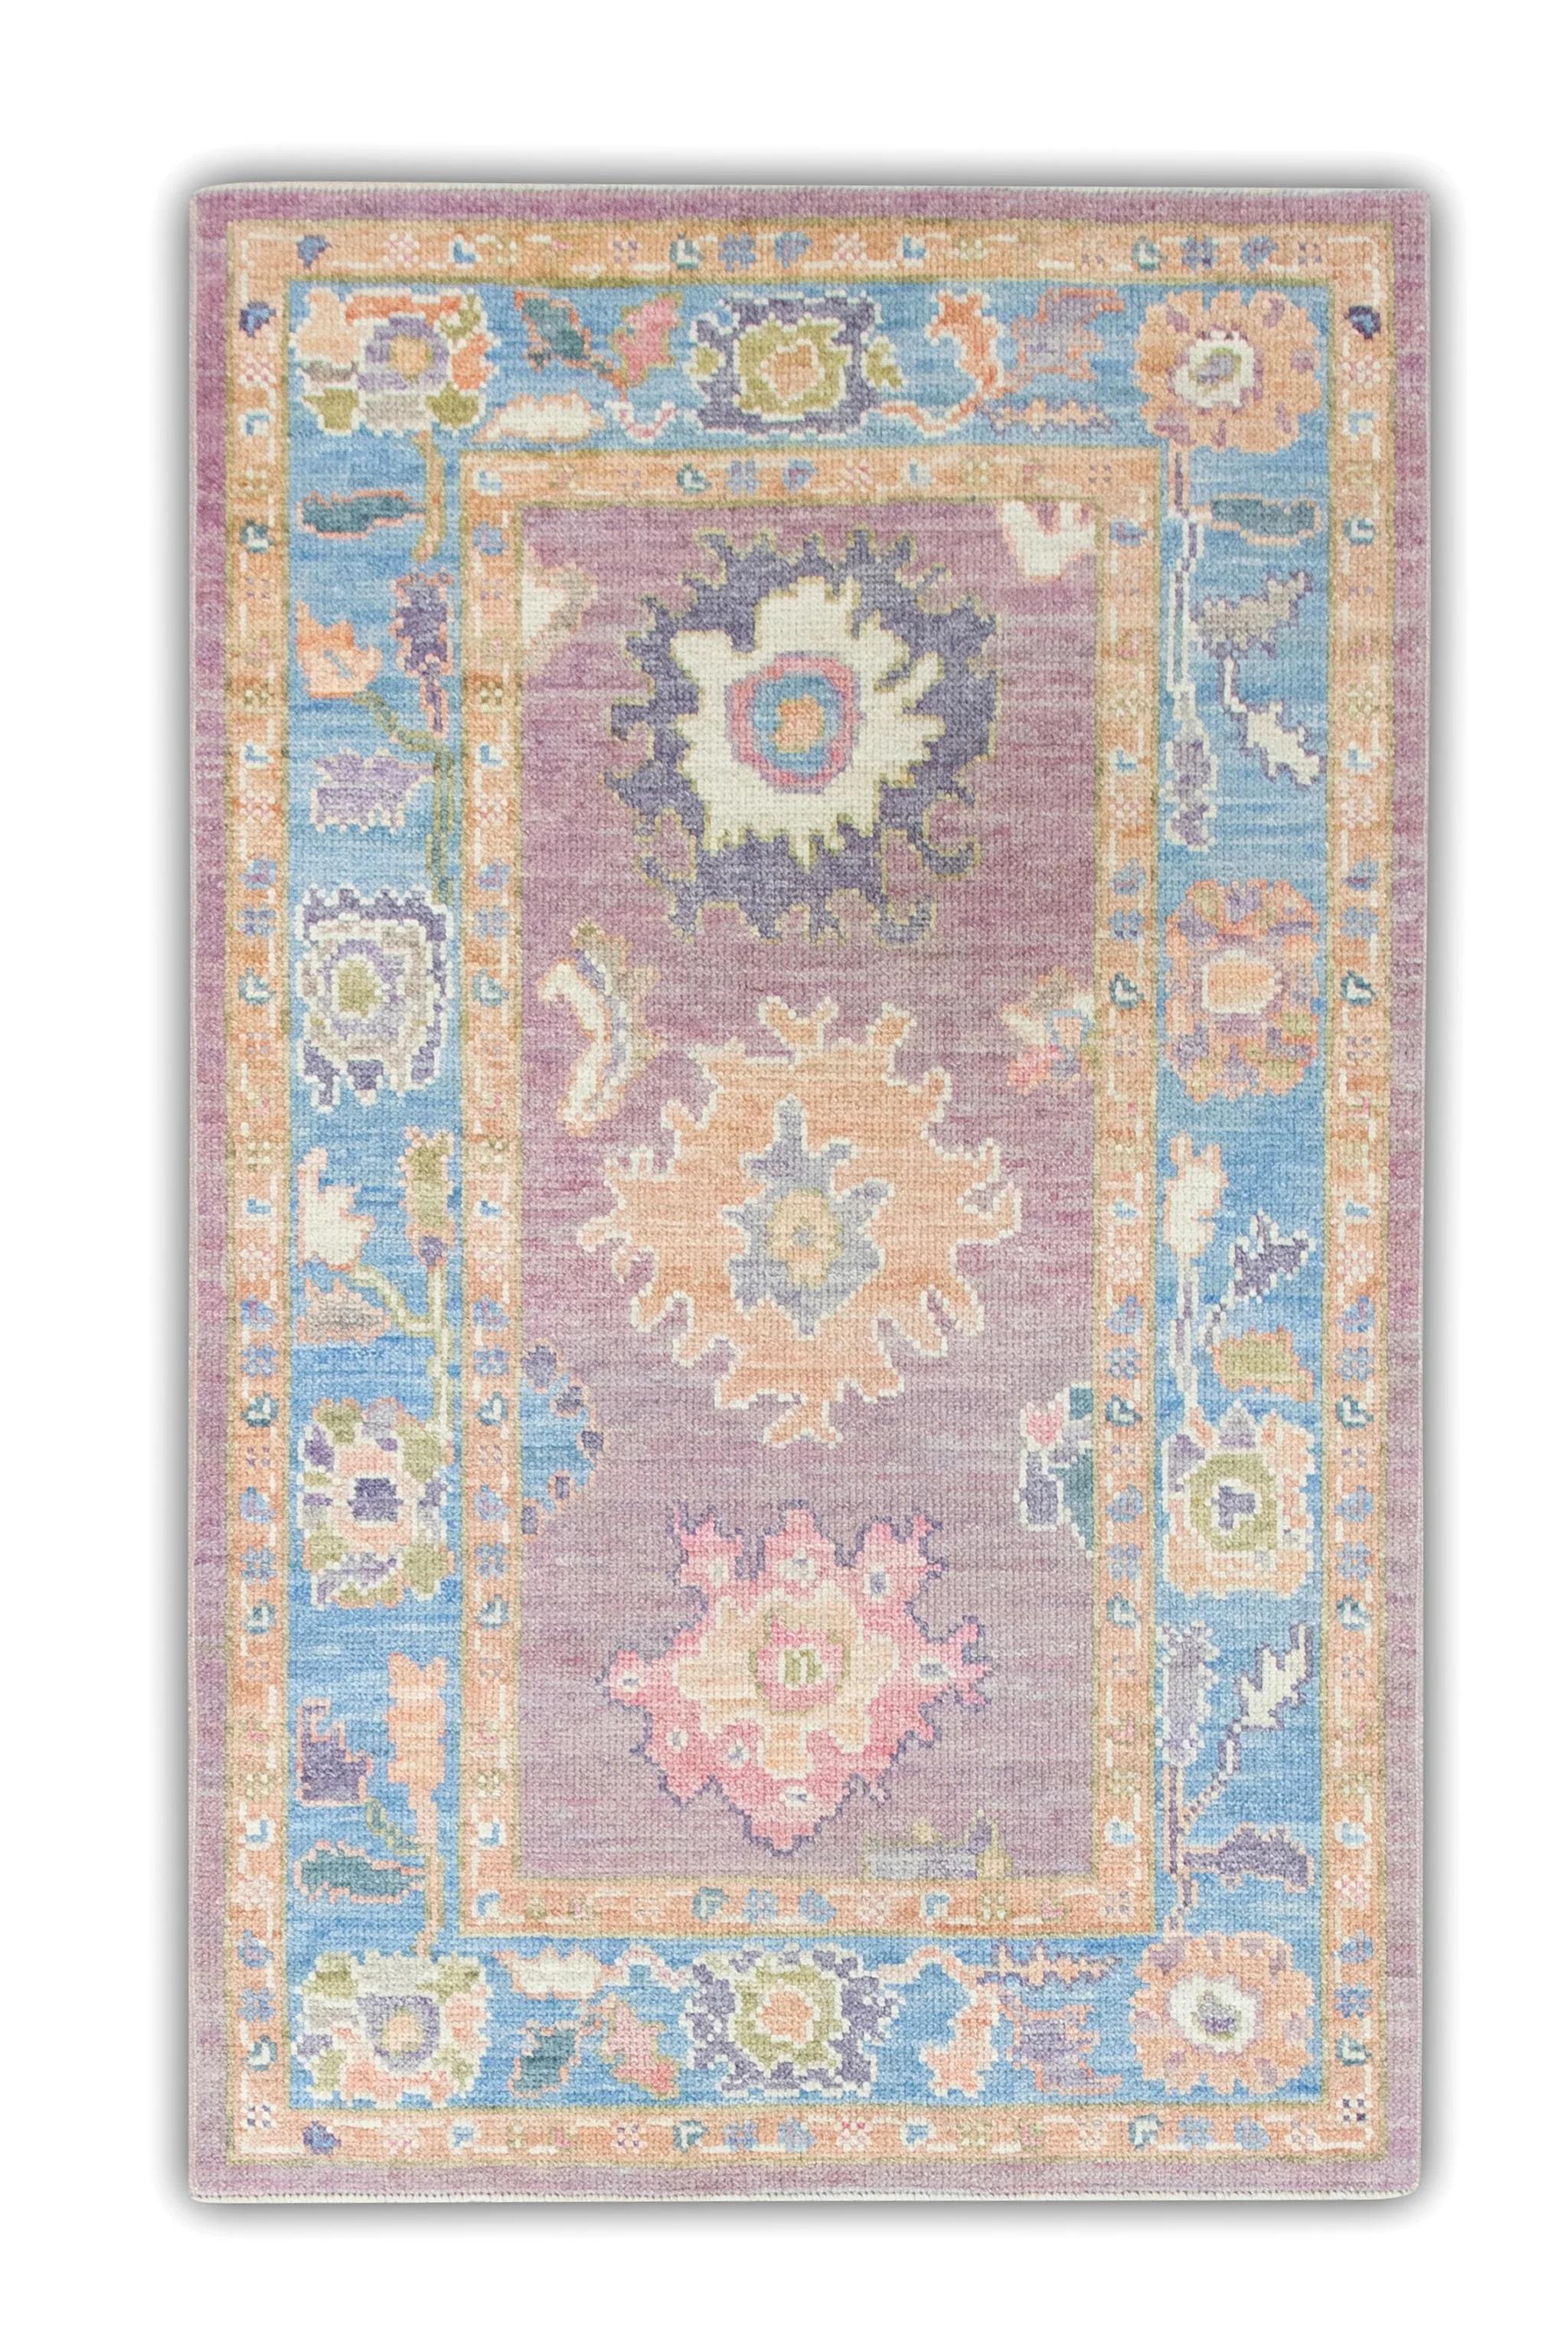 Contemporary Colorful Purple Handwoven Wool Turkish Oushak Rug in Floral Design 3' x 5' For Sale